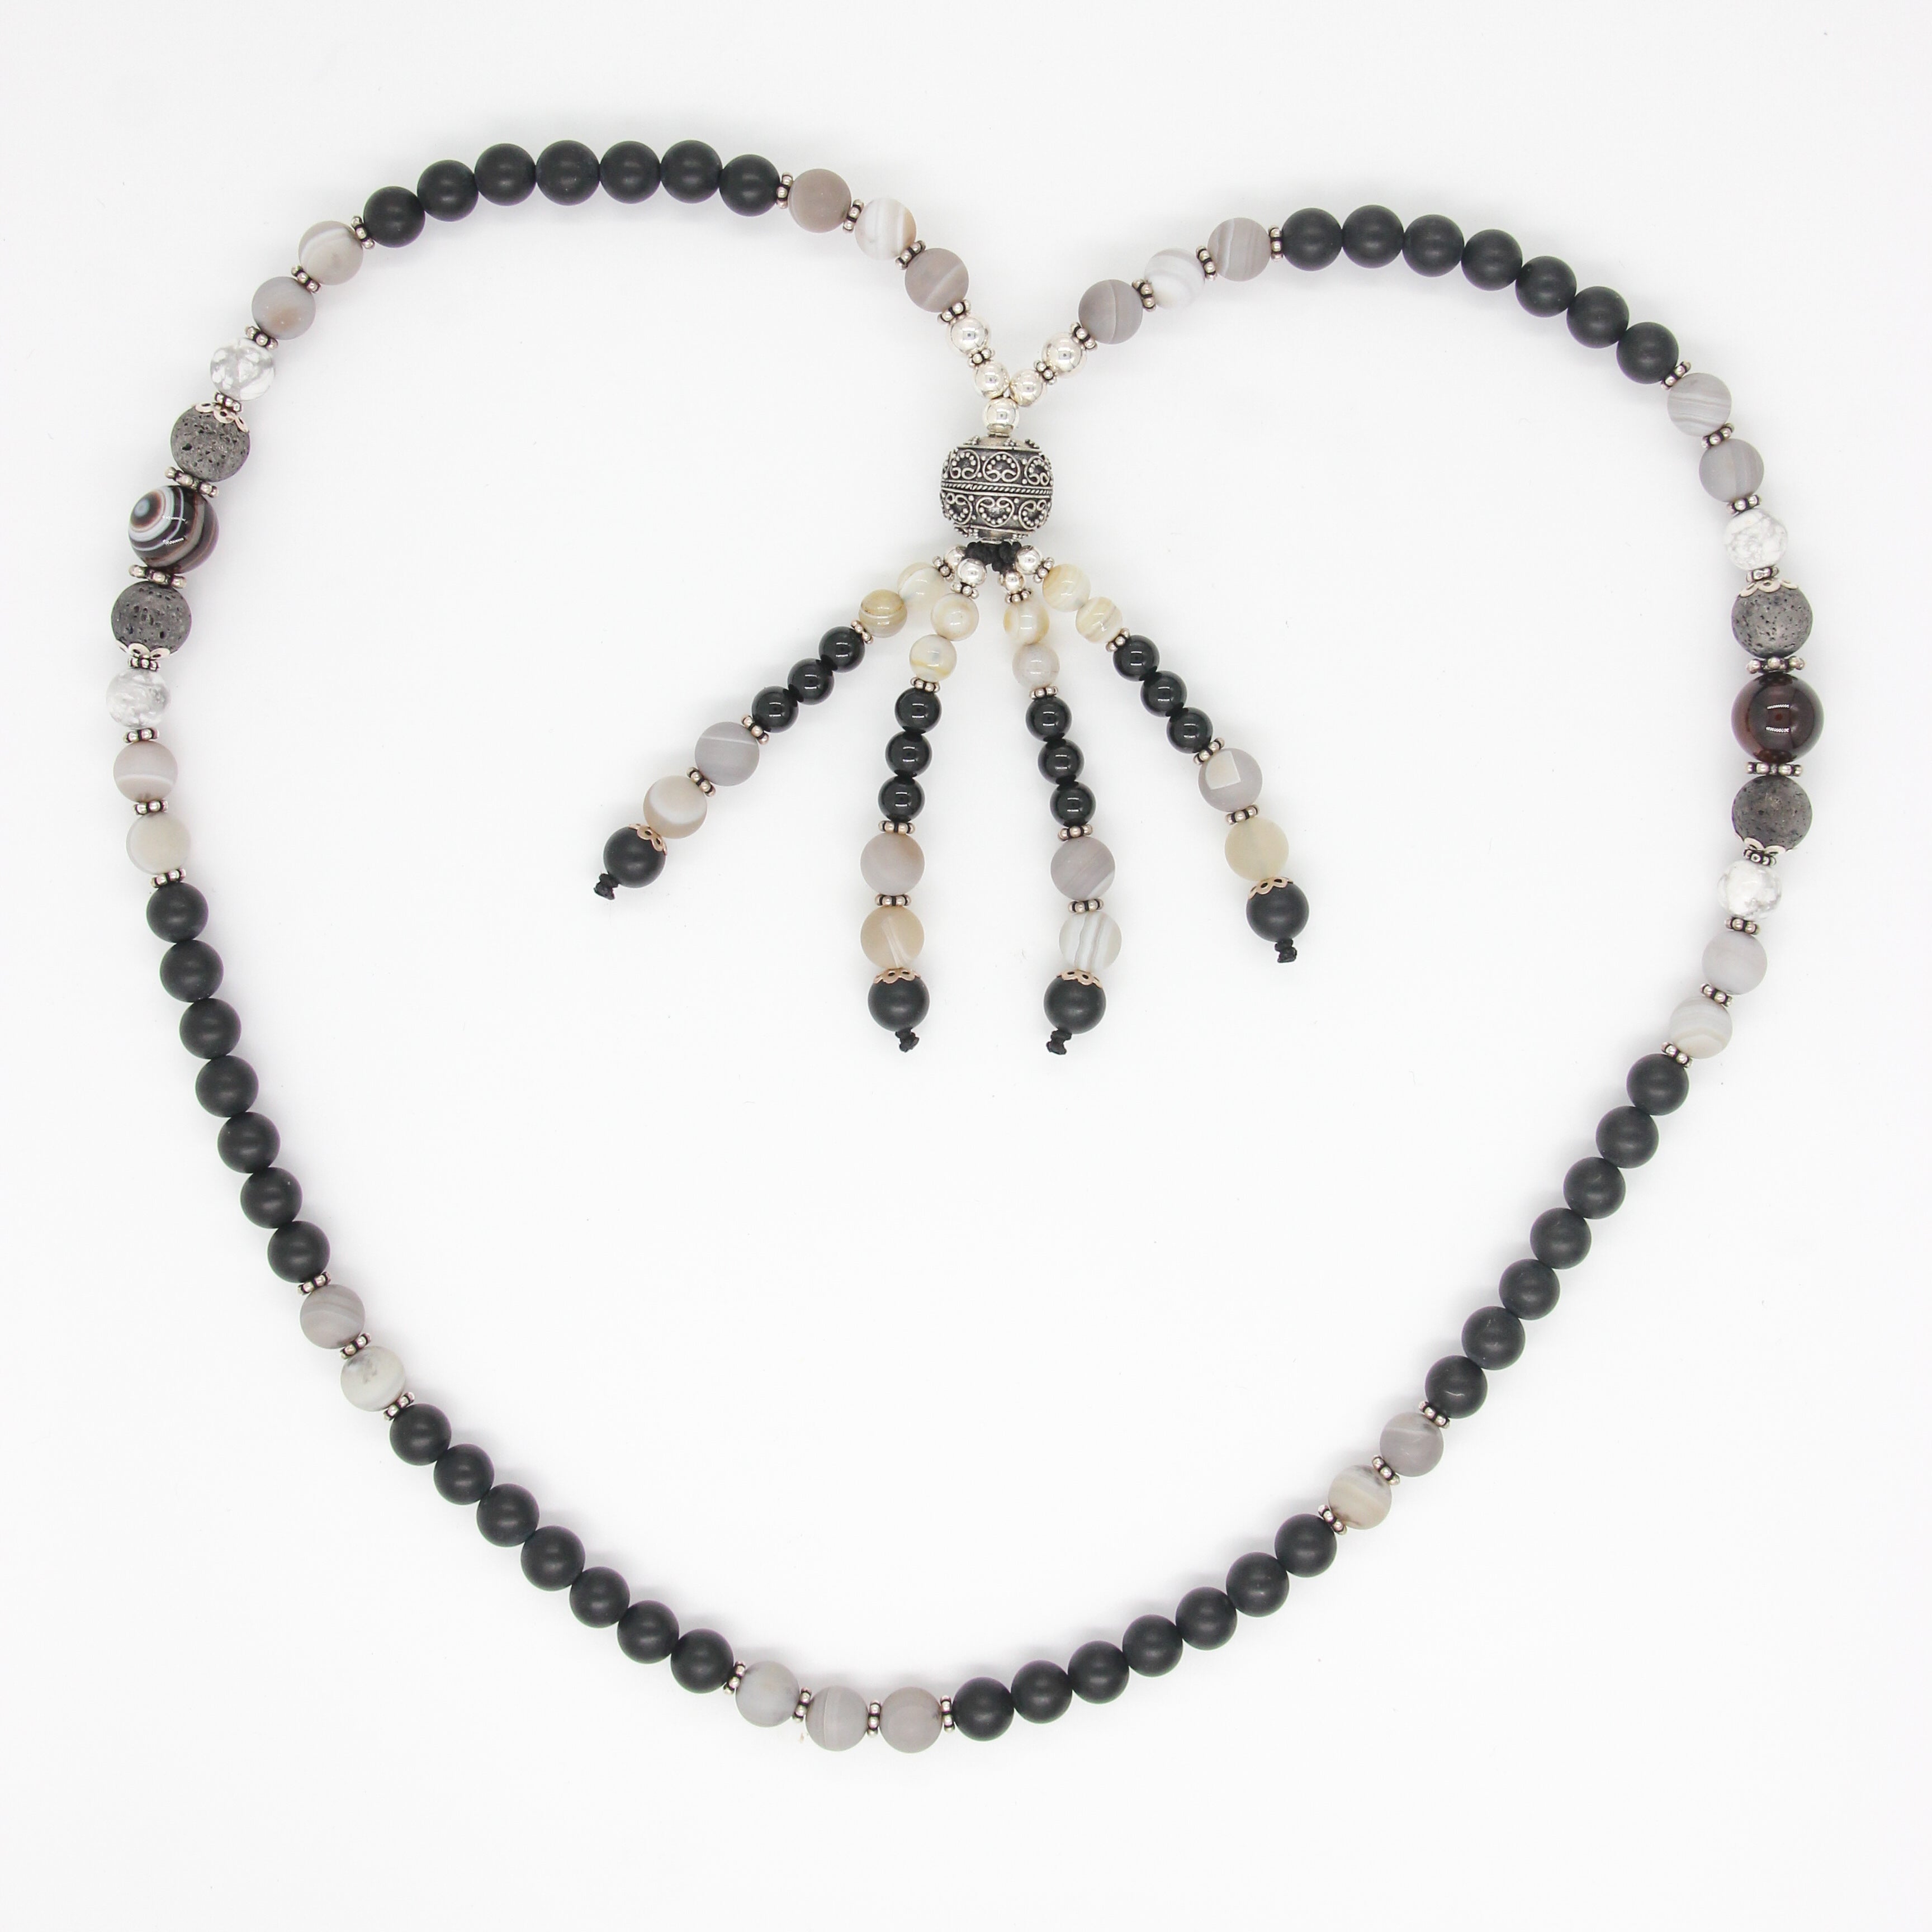 Black Onyx Beads Necklace with Agate, Lava, Howlite and Silver Beads